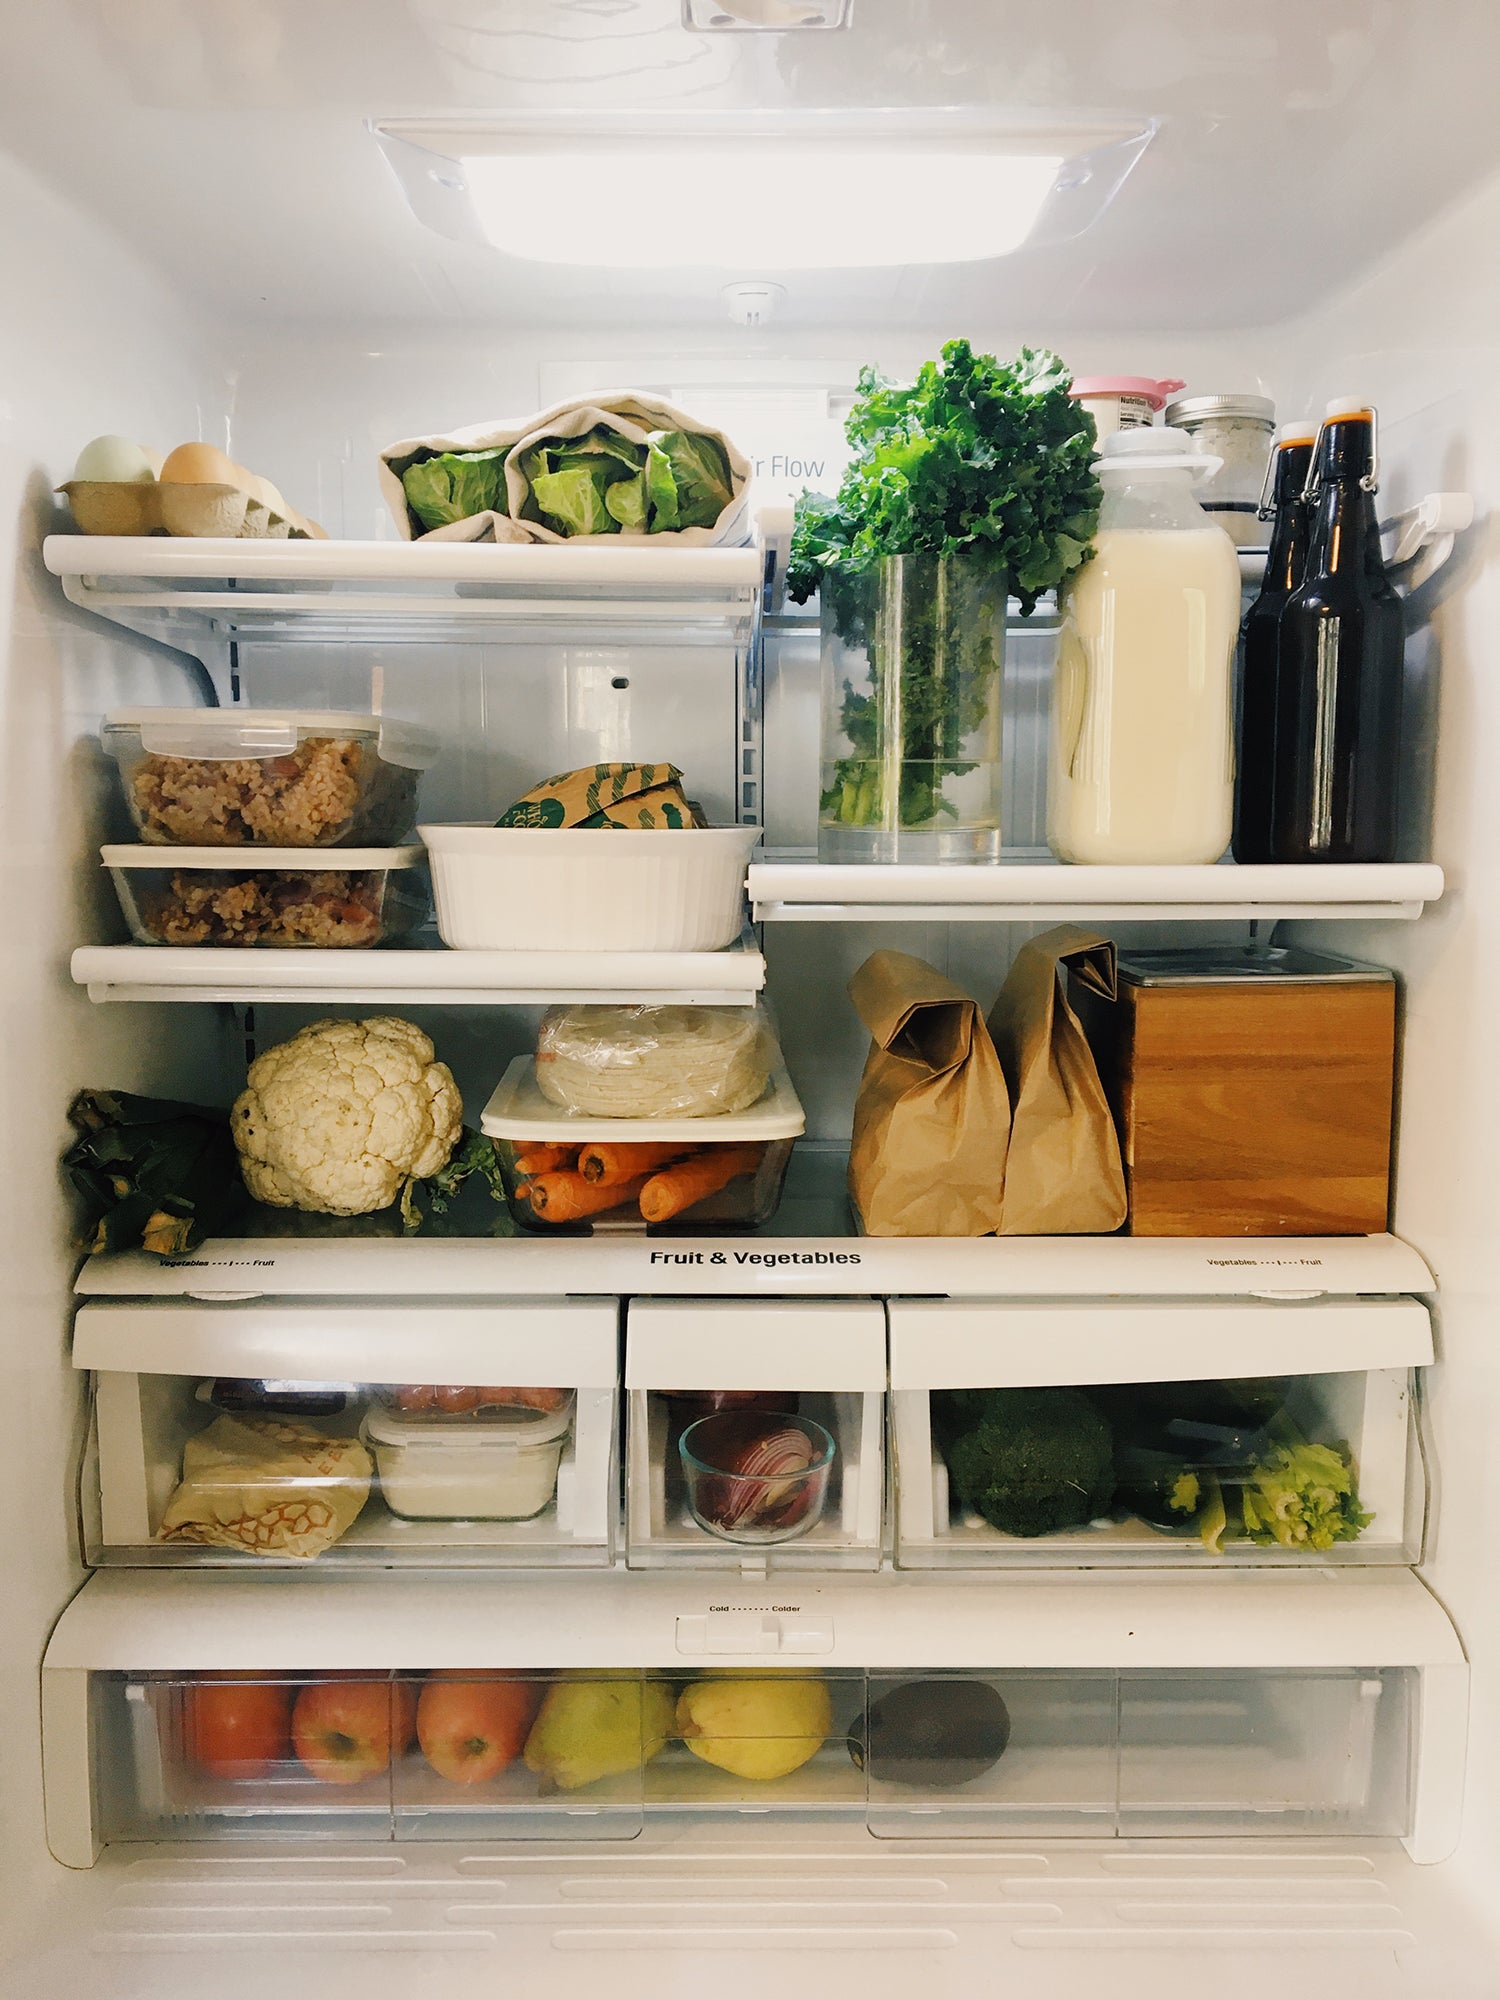 Want your produce to last longer in your fridge? Here is the